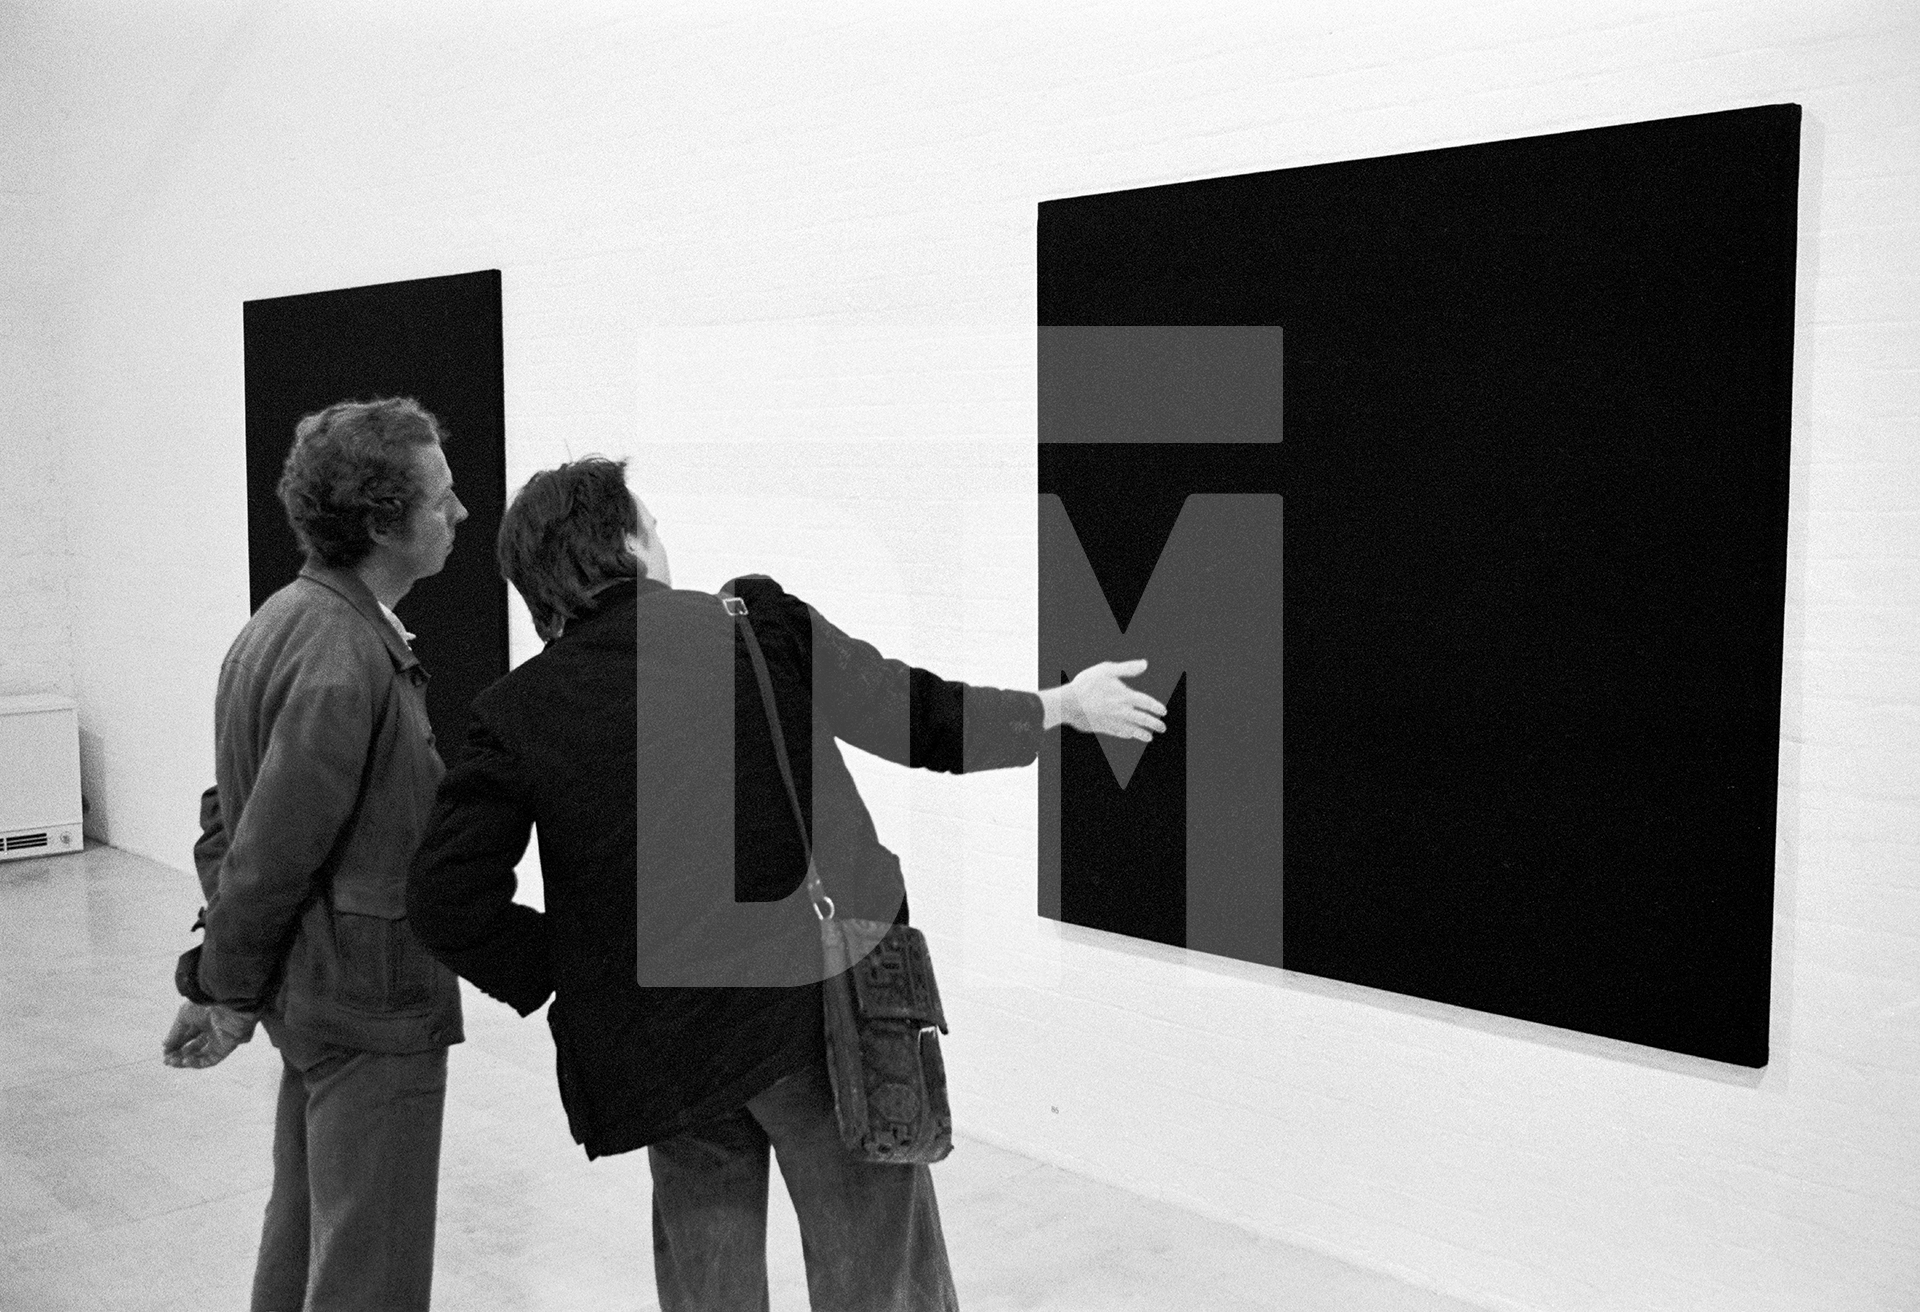 Exhibition opening of work by artist Bob Law, Museum of Modern Art, Oxford. May 1974 by Daniel Meadows